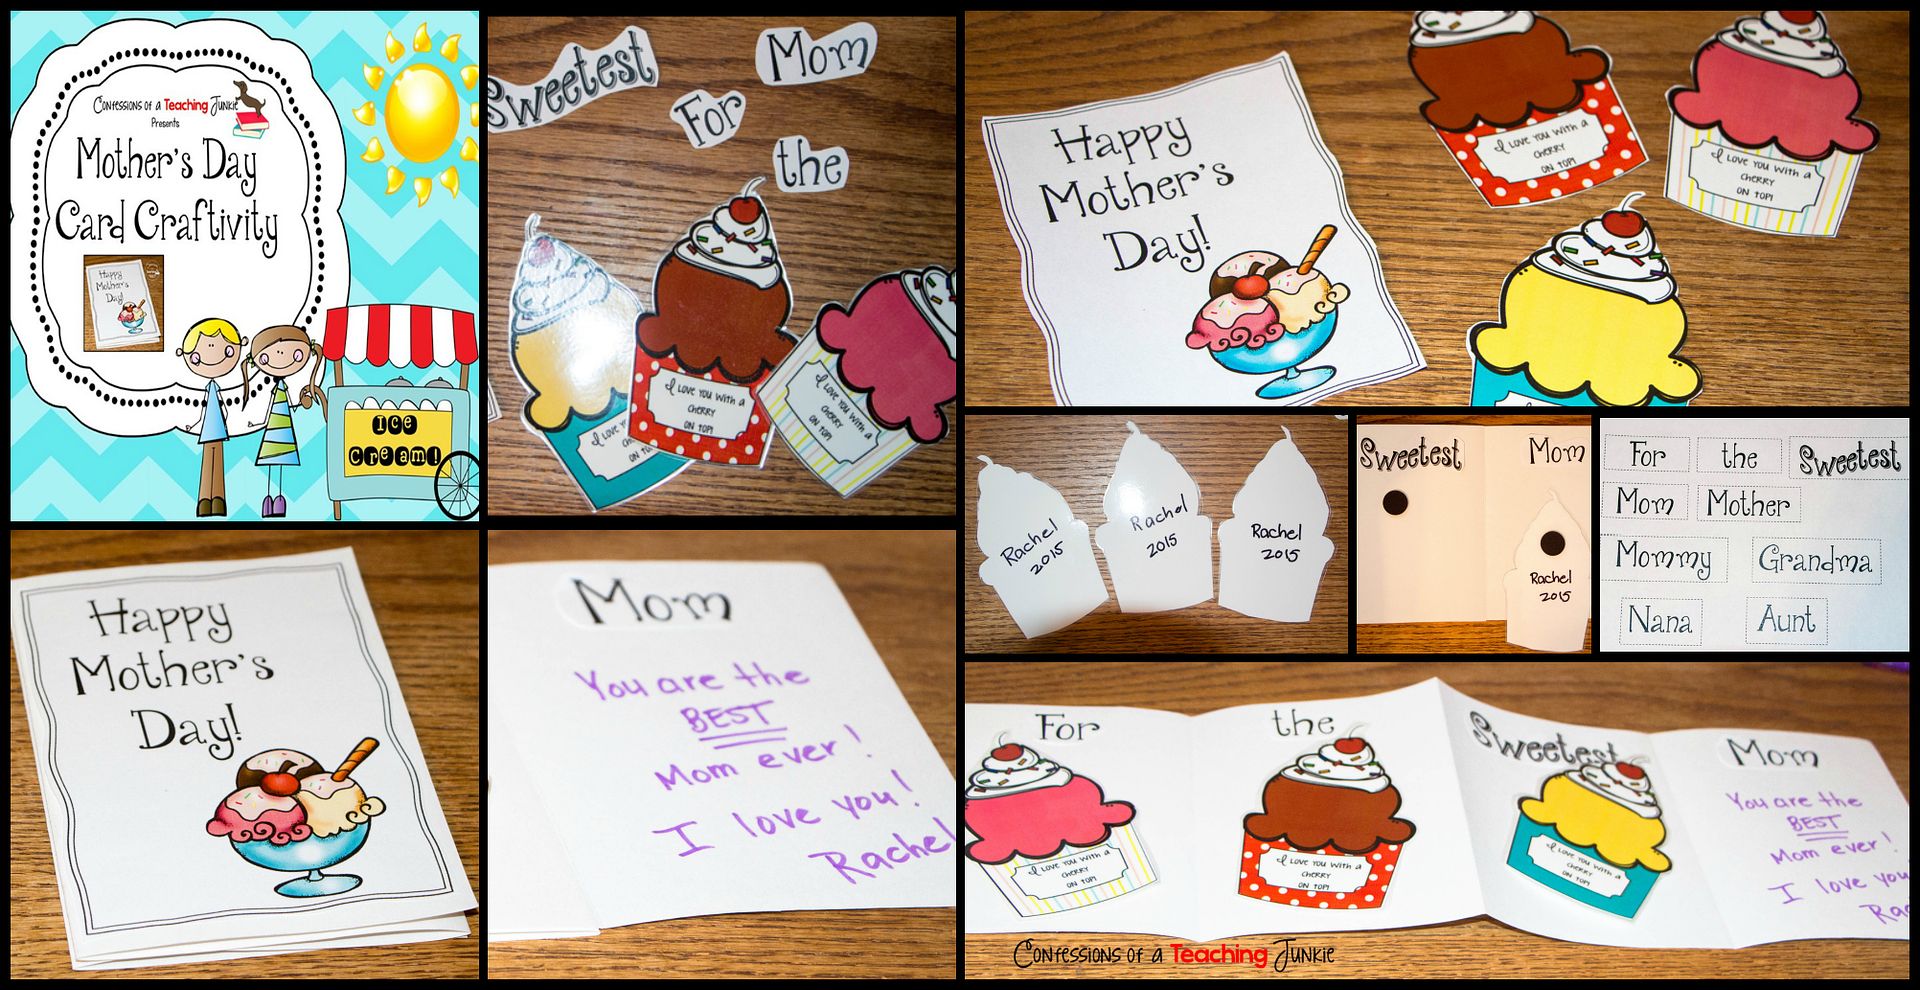 This bright and cheerful Mother’s Day craftivity contains every thing you need to make a beautiful Mother’s Day card with an ice cream theme.